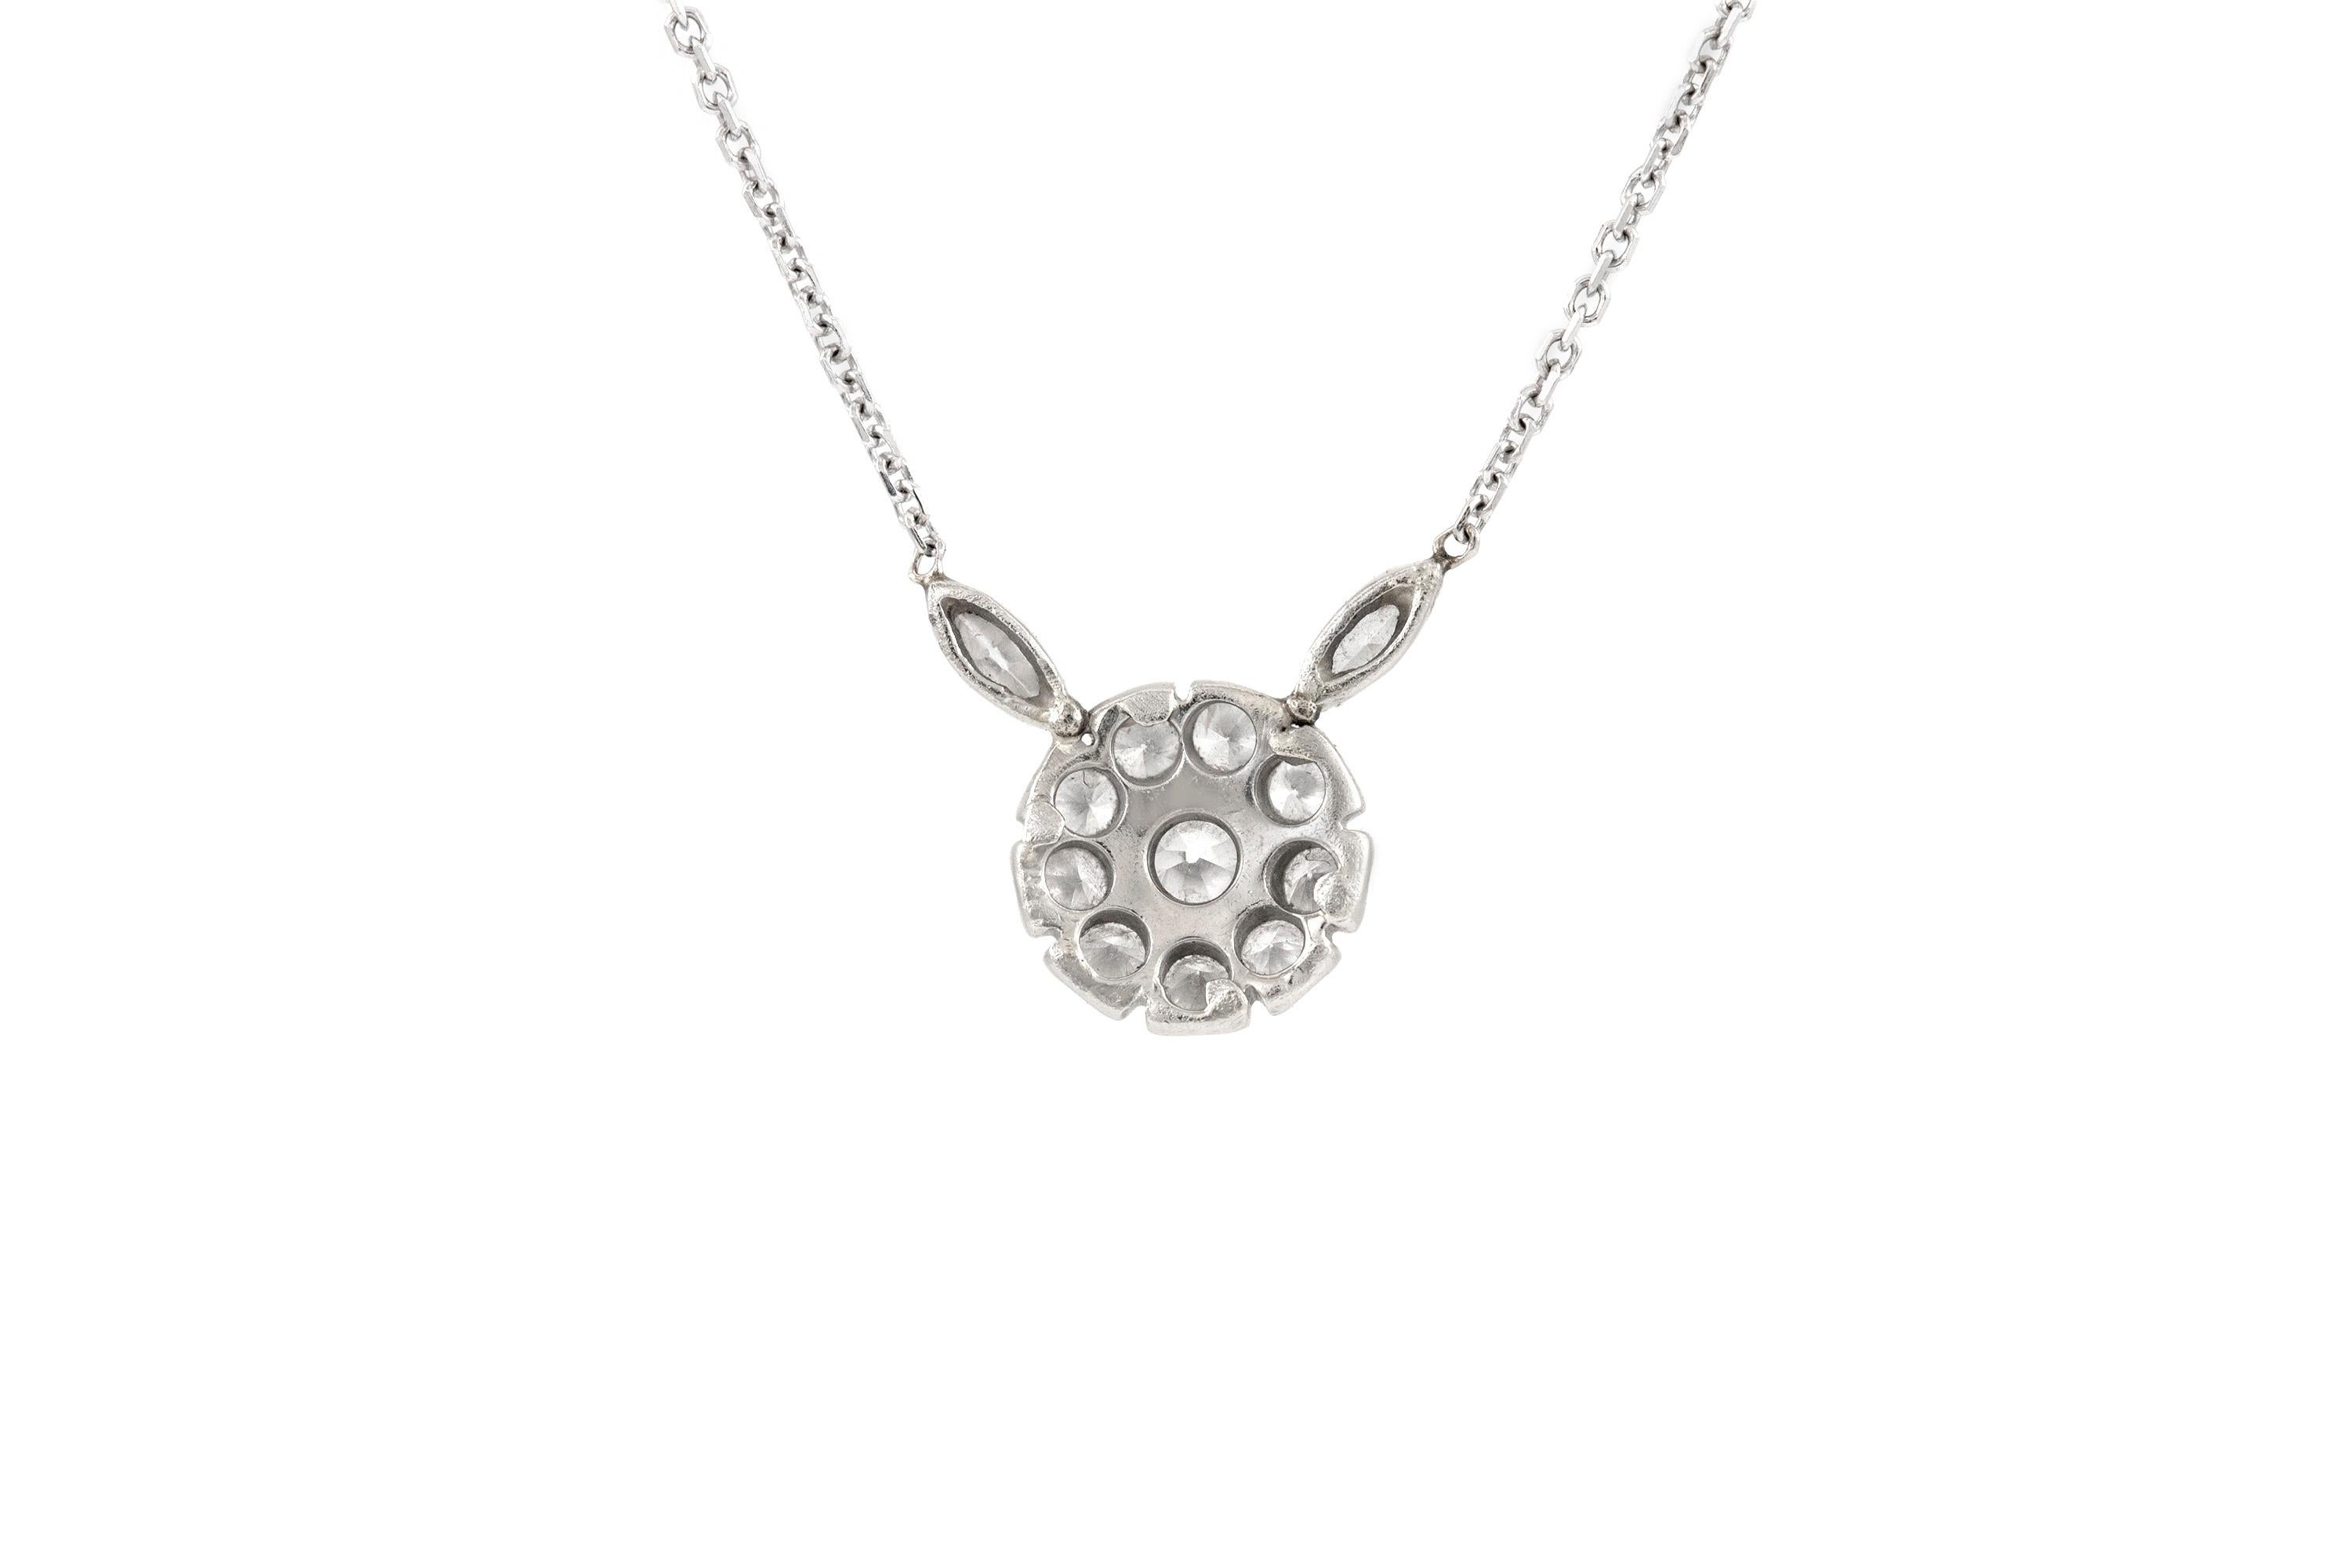 The pendant is finely crafted in 14k white gold with diamonds weighing approximately total of 0.80 carat.
Circa 1910.